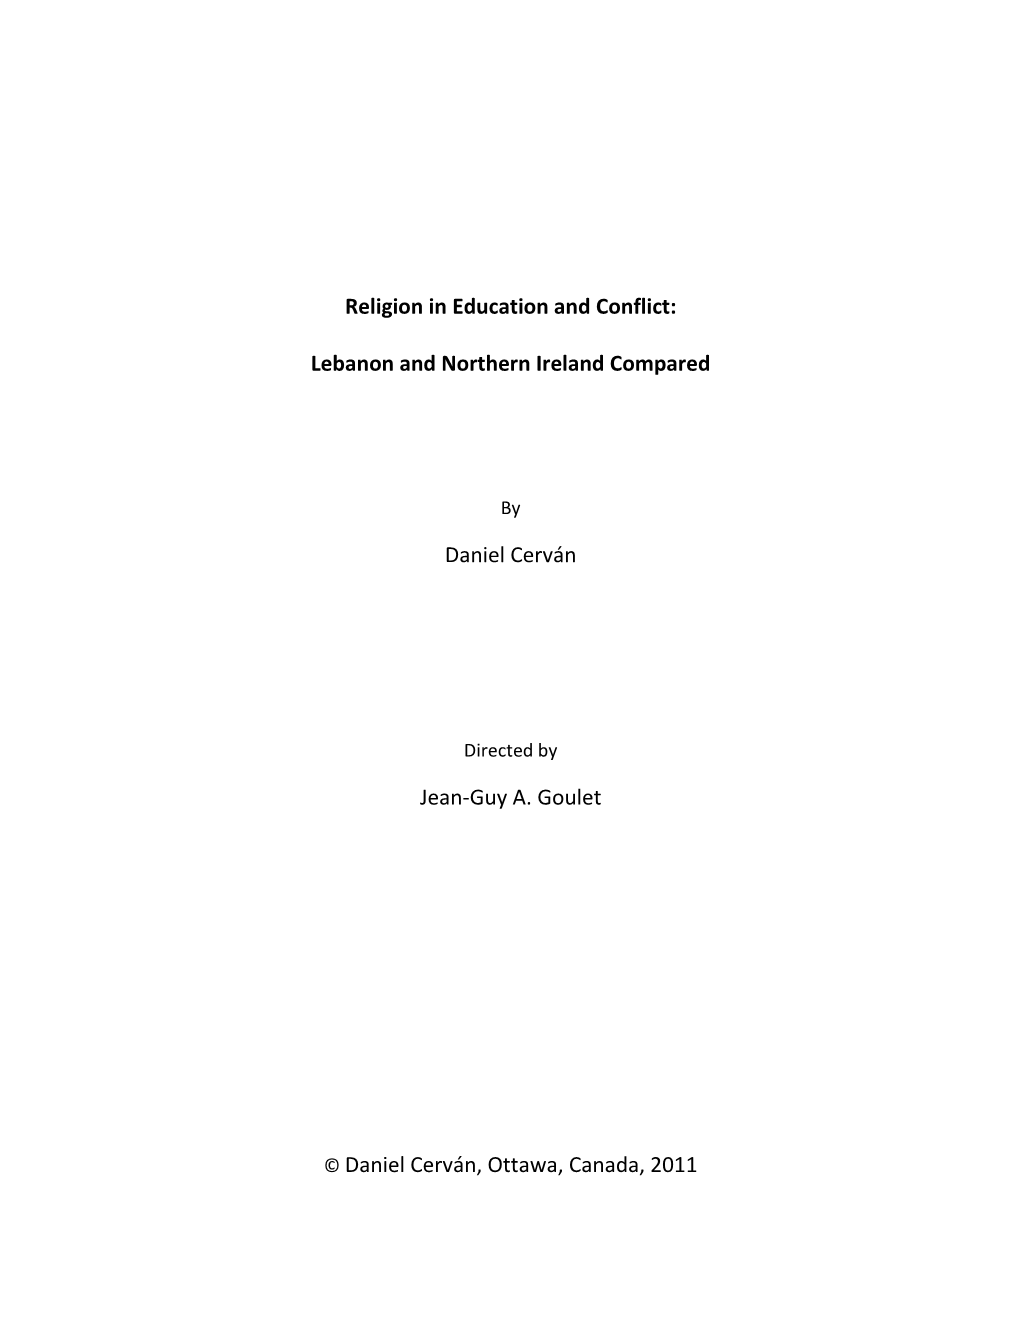 Religion in Education and Conflict